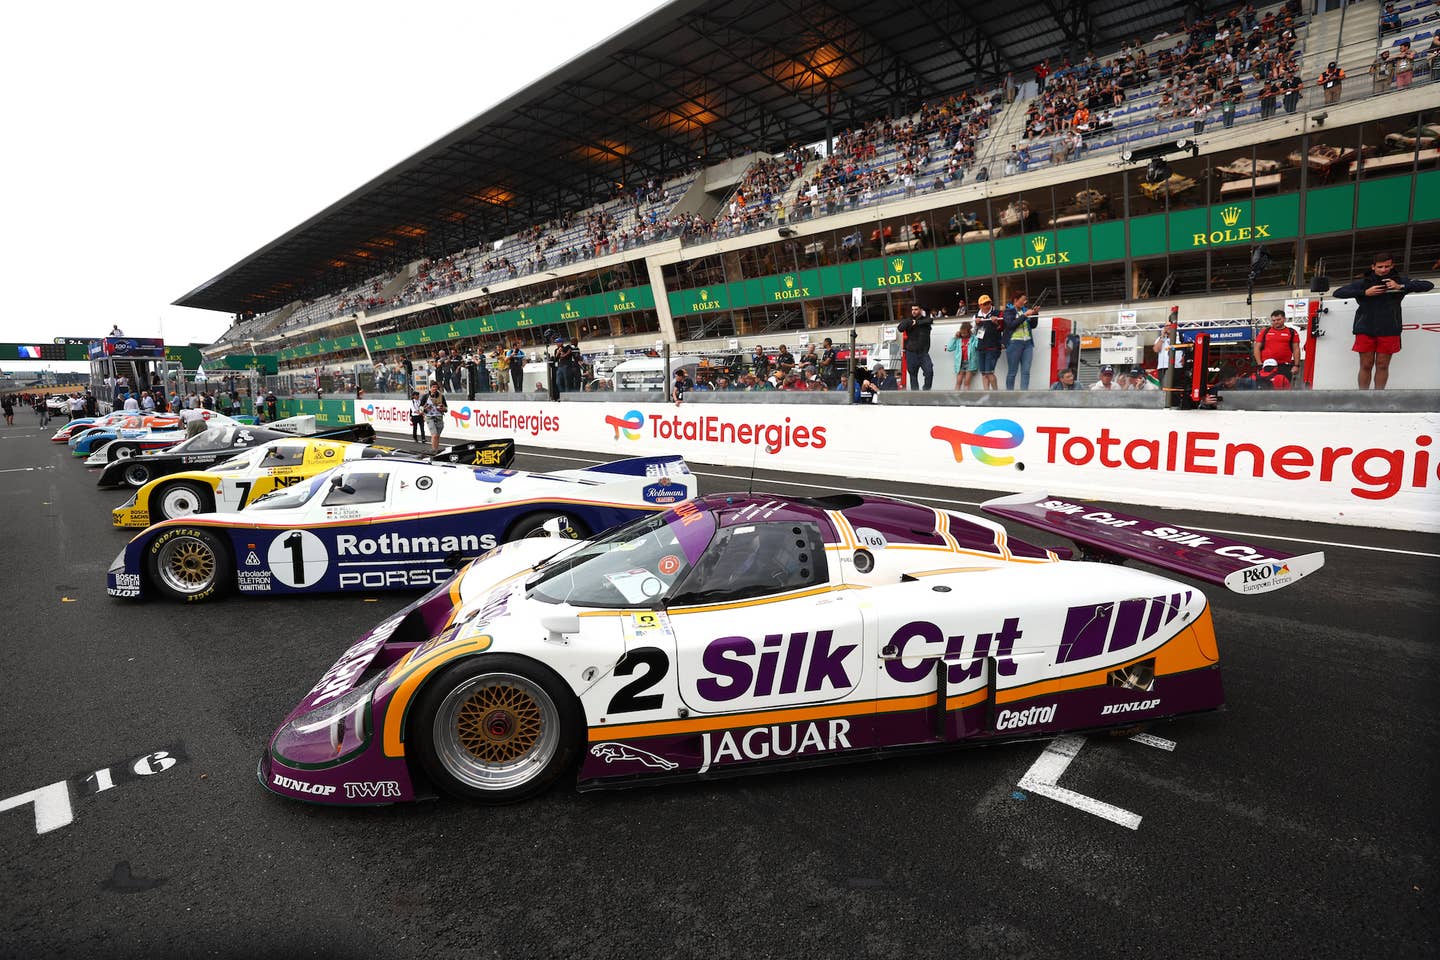 LE MANS, FRANCE - JUNE 09: The Silk Cut Jaguar takes part in a historic entrants parade ahead of the 100th anniversary of the 24 Hours of Le Mans race at the Circuit de la Sarthe June 9, 2023 in Le Mans, France. (Photo by Clive Rose/Getty Images)